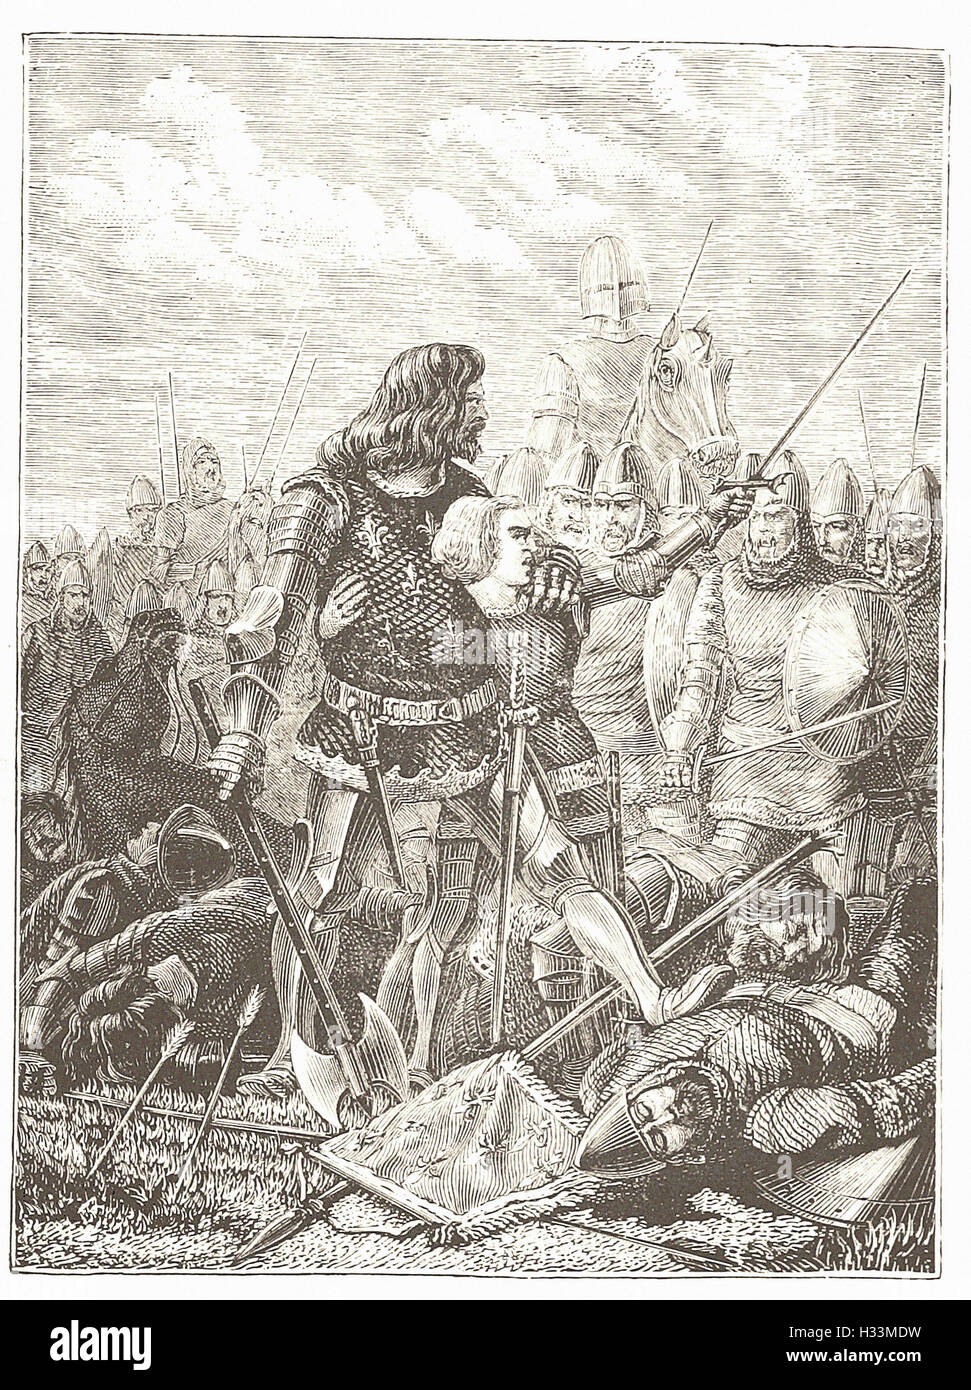 KING JOHN AT POITIERS - from 'Cassell's Illustrated Universal History' - 1882 Stock Photo